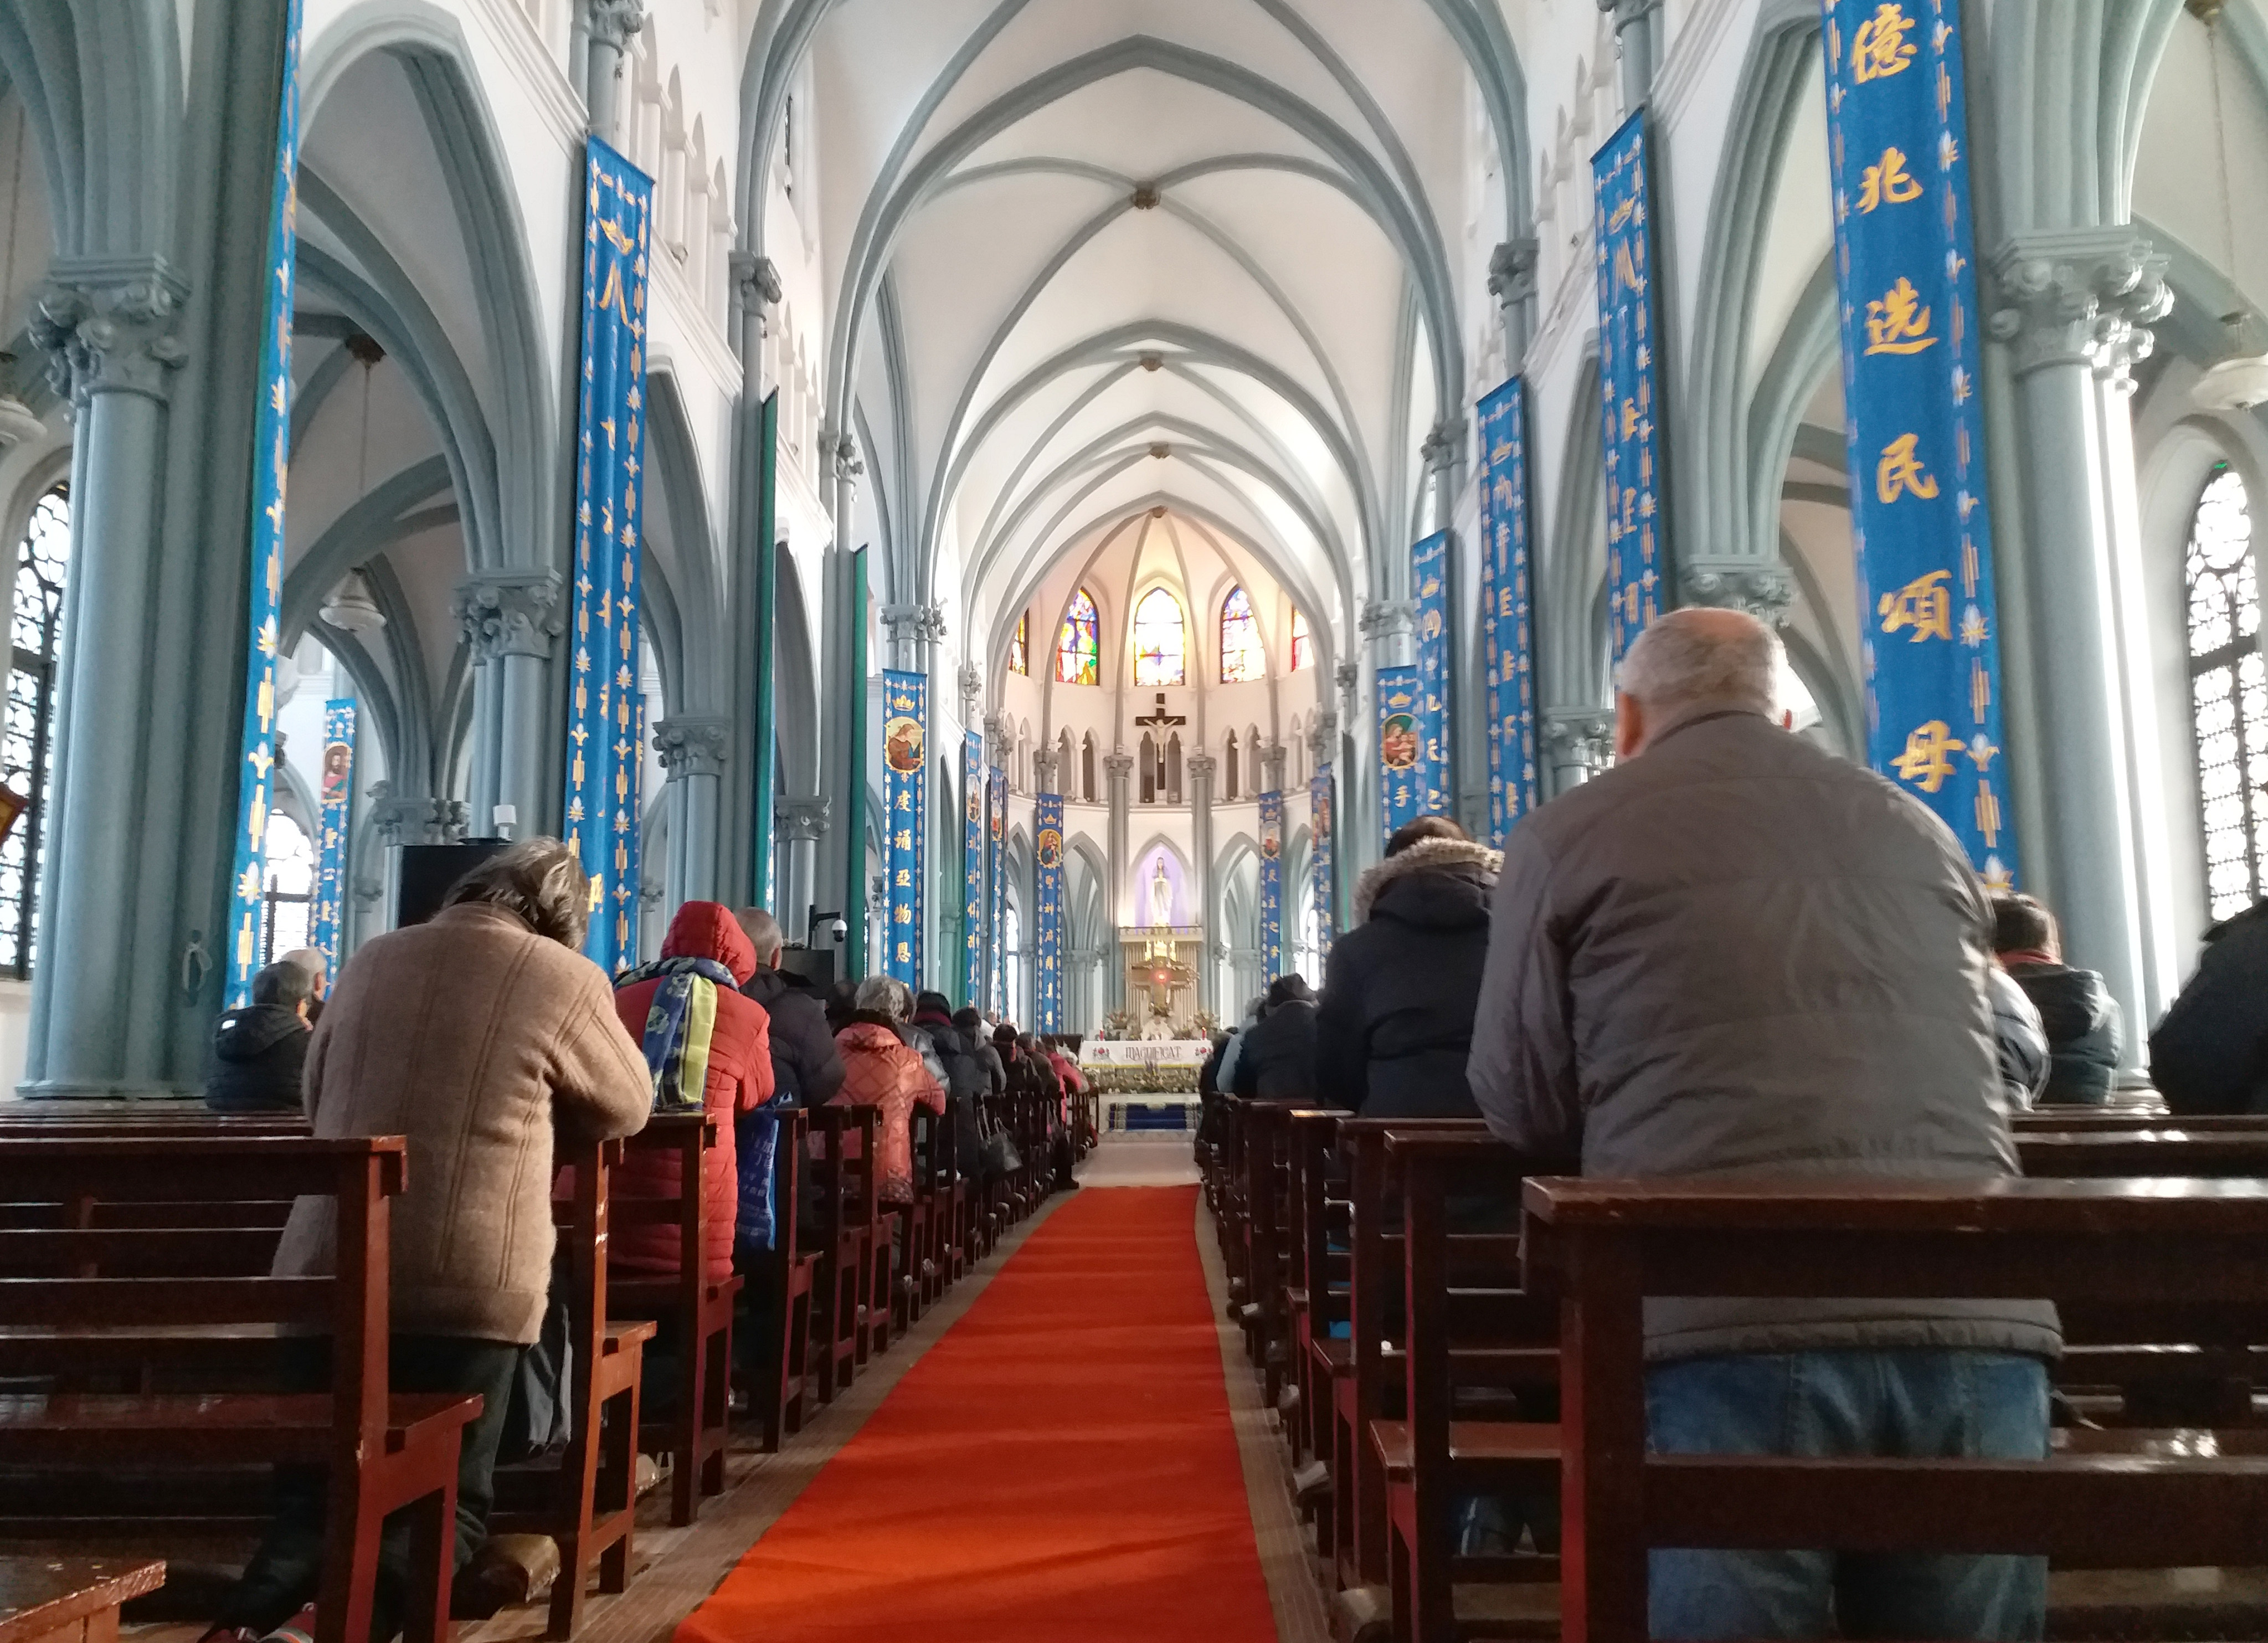 Worshippers are seen at a Catholic church in Shanghai in February 2018. Photo: Mimi Lau